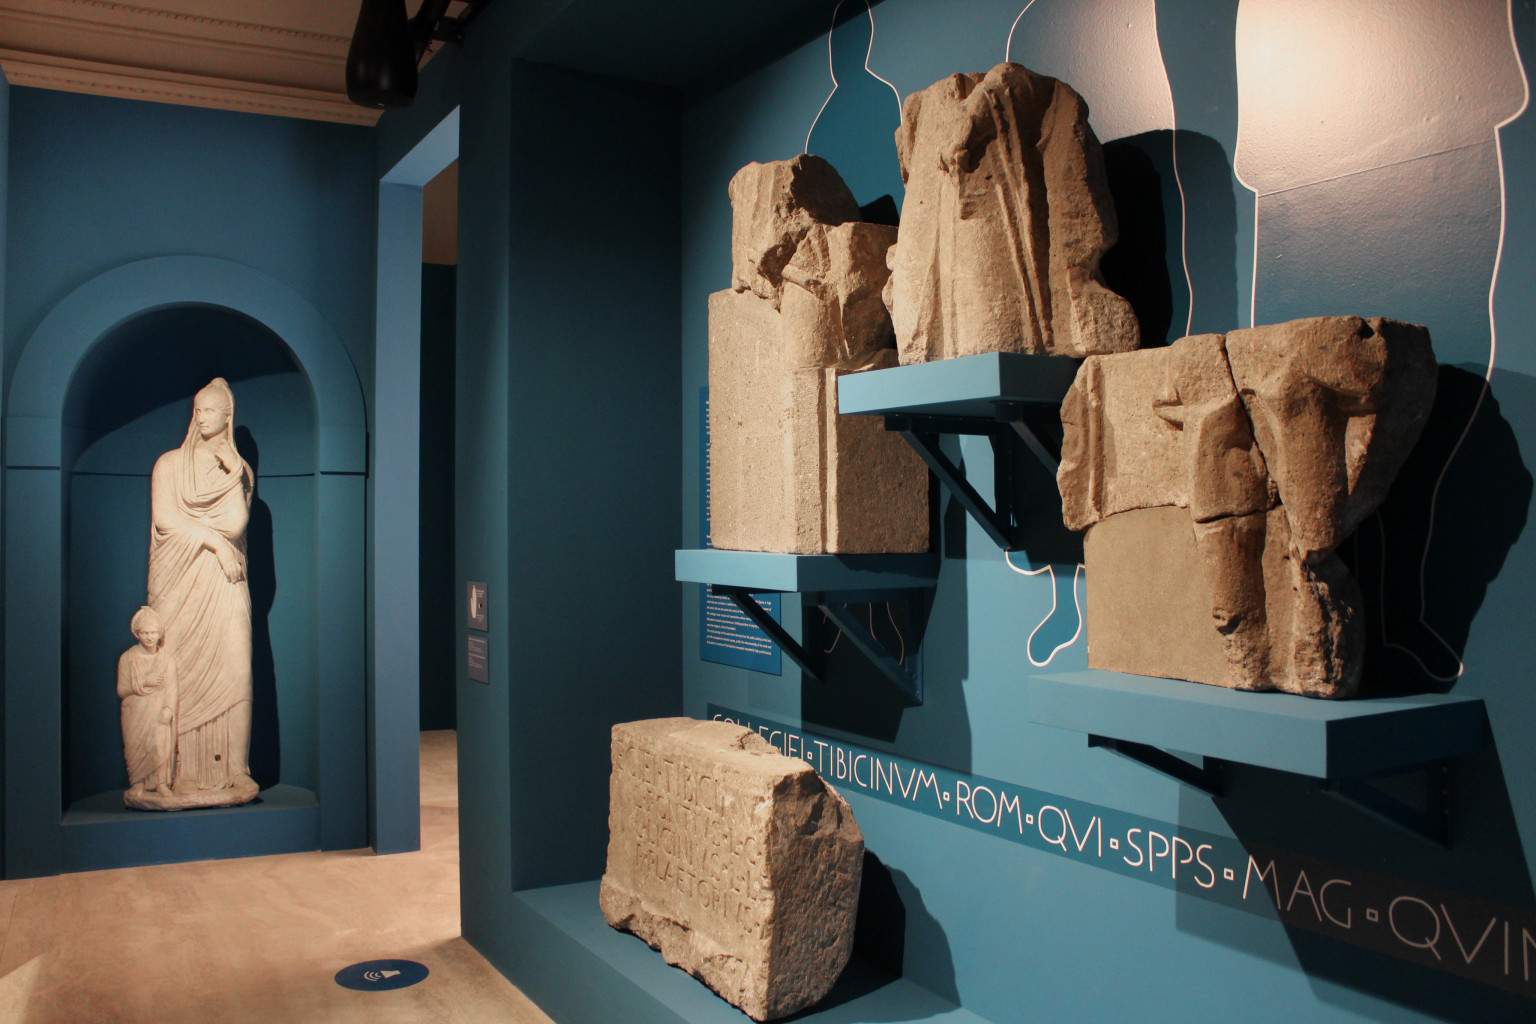 In Rome, an exhibition on cursus honorum, at the Capitoline Museums